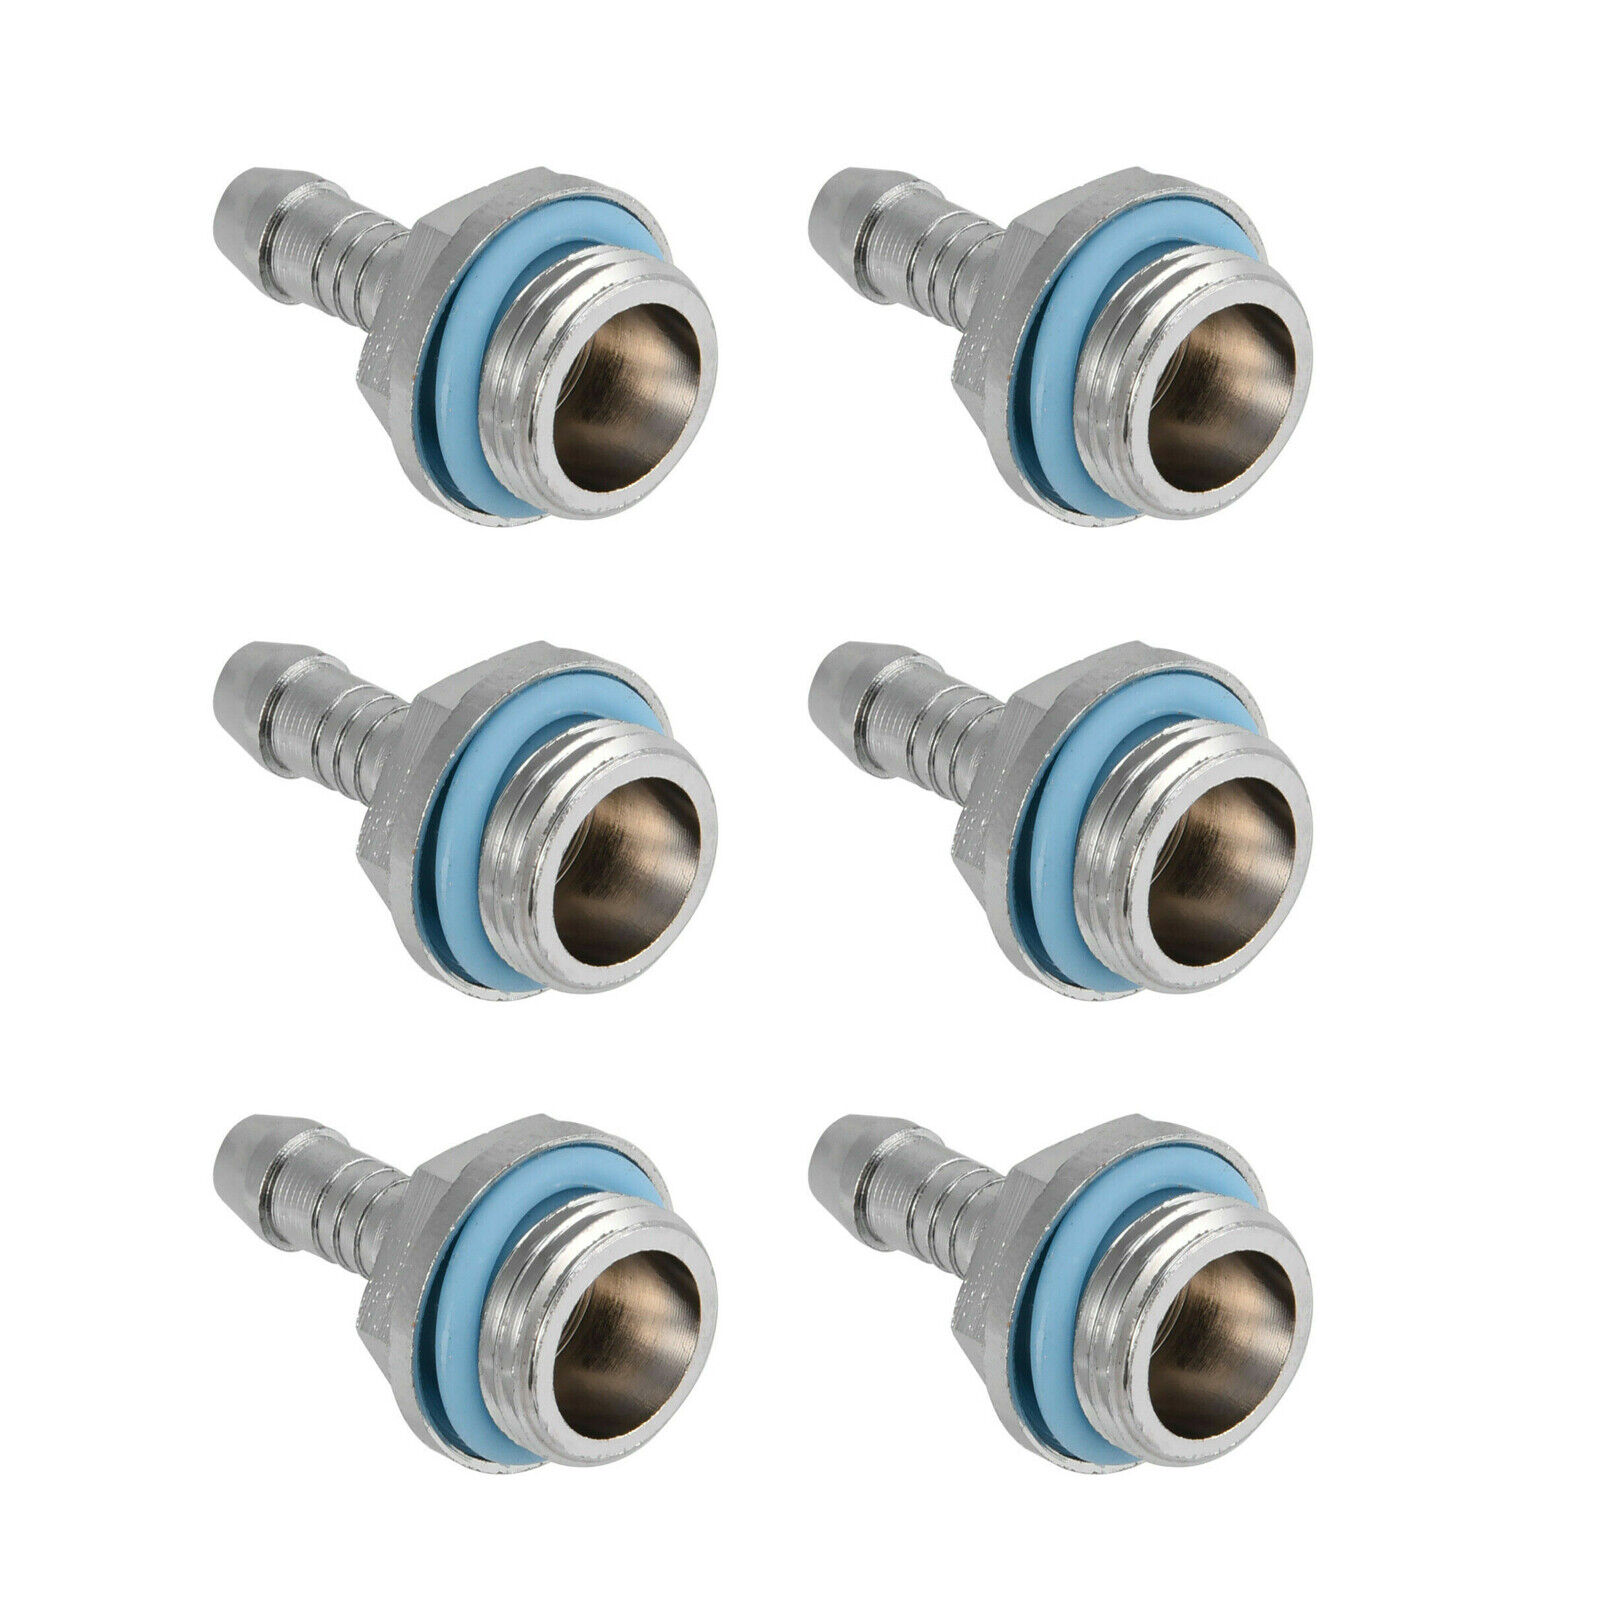 6 Pcs Barb Fittings Joint With Waterproof Sealing Ring For  PC Water Cooling